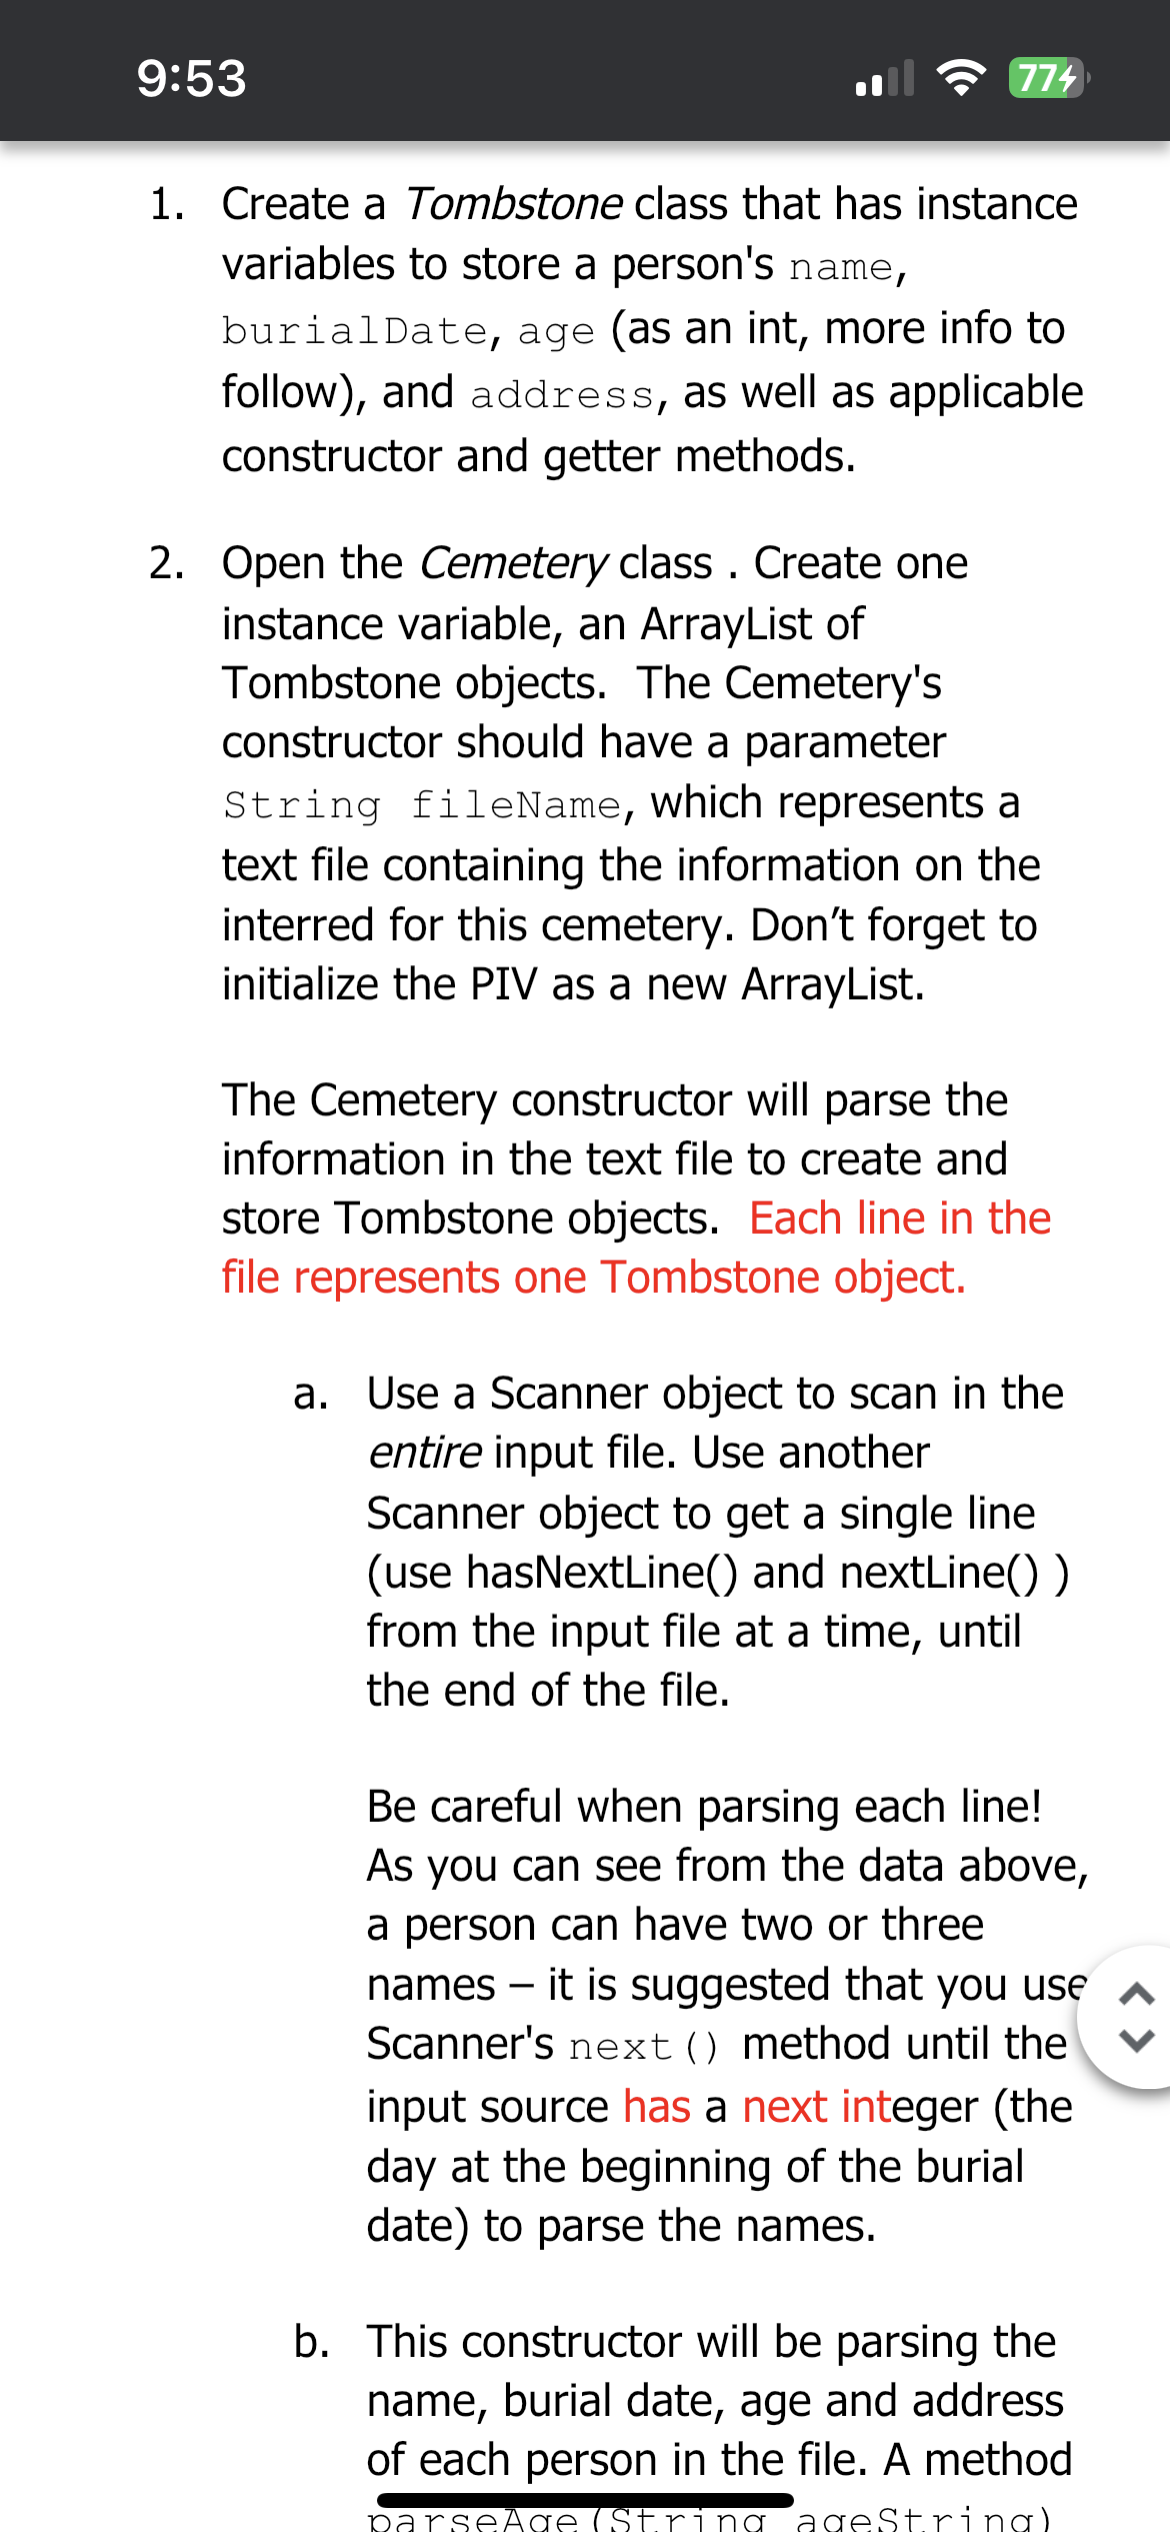 9:53
774
1. Create a Tombstone class that has instance
variables to store a person's name,
burialDate, age (as an int, more info to
follow), and address, as well as applicable
constructor and getter methods.
2. Open the Cemetery class. Create one
instance variable, an ArrayList of
Tombstone objects. The Cemetery's
constructor should have a parameter
String fileName, which represents a
text file containing the information on the
interred for this cemetery. Don't forget to
initialize the PIV as a new ArrayList.
The Cemetery constructor will parse the
information in the text file to create and
store Tombstone objects. Each line in the
file represents one Tombstone object.
a. Use a Scanner object to scan in the
entire input file. Use another
Scanner object to get a single line
(use hasNextLine() and nextLine())
from the input file at a time, until
the end of the file.
Be careful when parsing each line!
As you can see from the data above,
a person can have two or three
names - it is suggested that you use
Scanner's next () method until the
input source has a next integer (the
day at the beginning of the burial
date) to parse the names.
b. This constructor will be parsing the
name, burial date, age and address
of each person in the file. A method
parseÃge (String ageString)